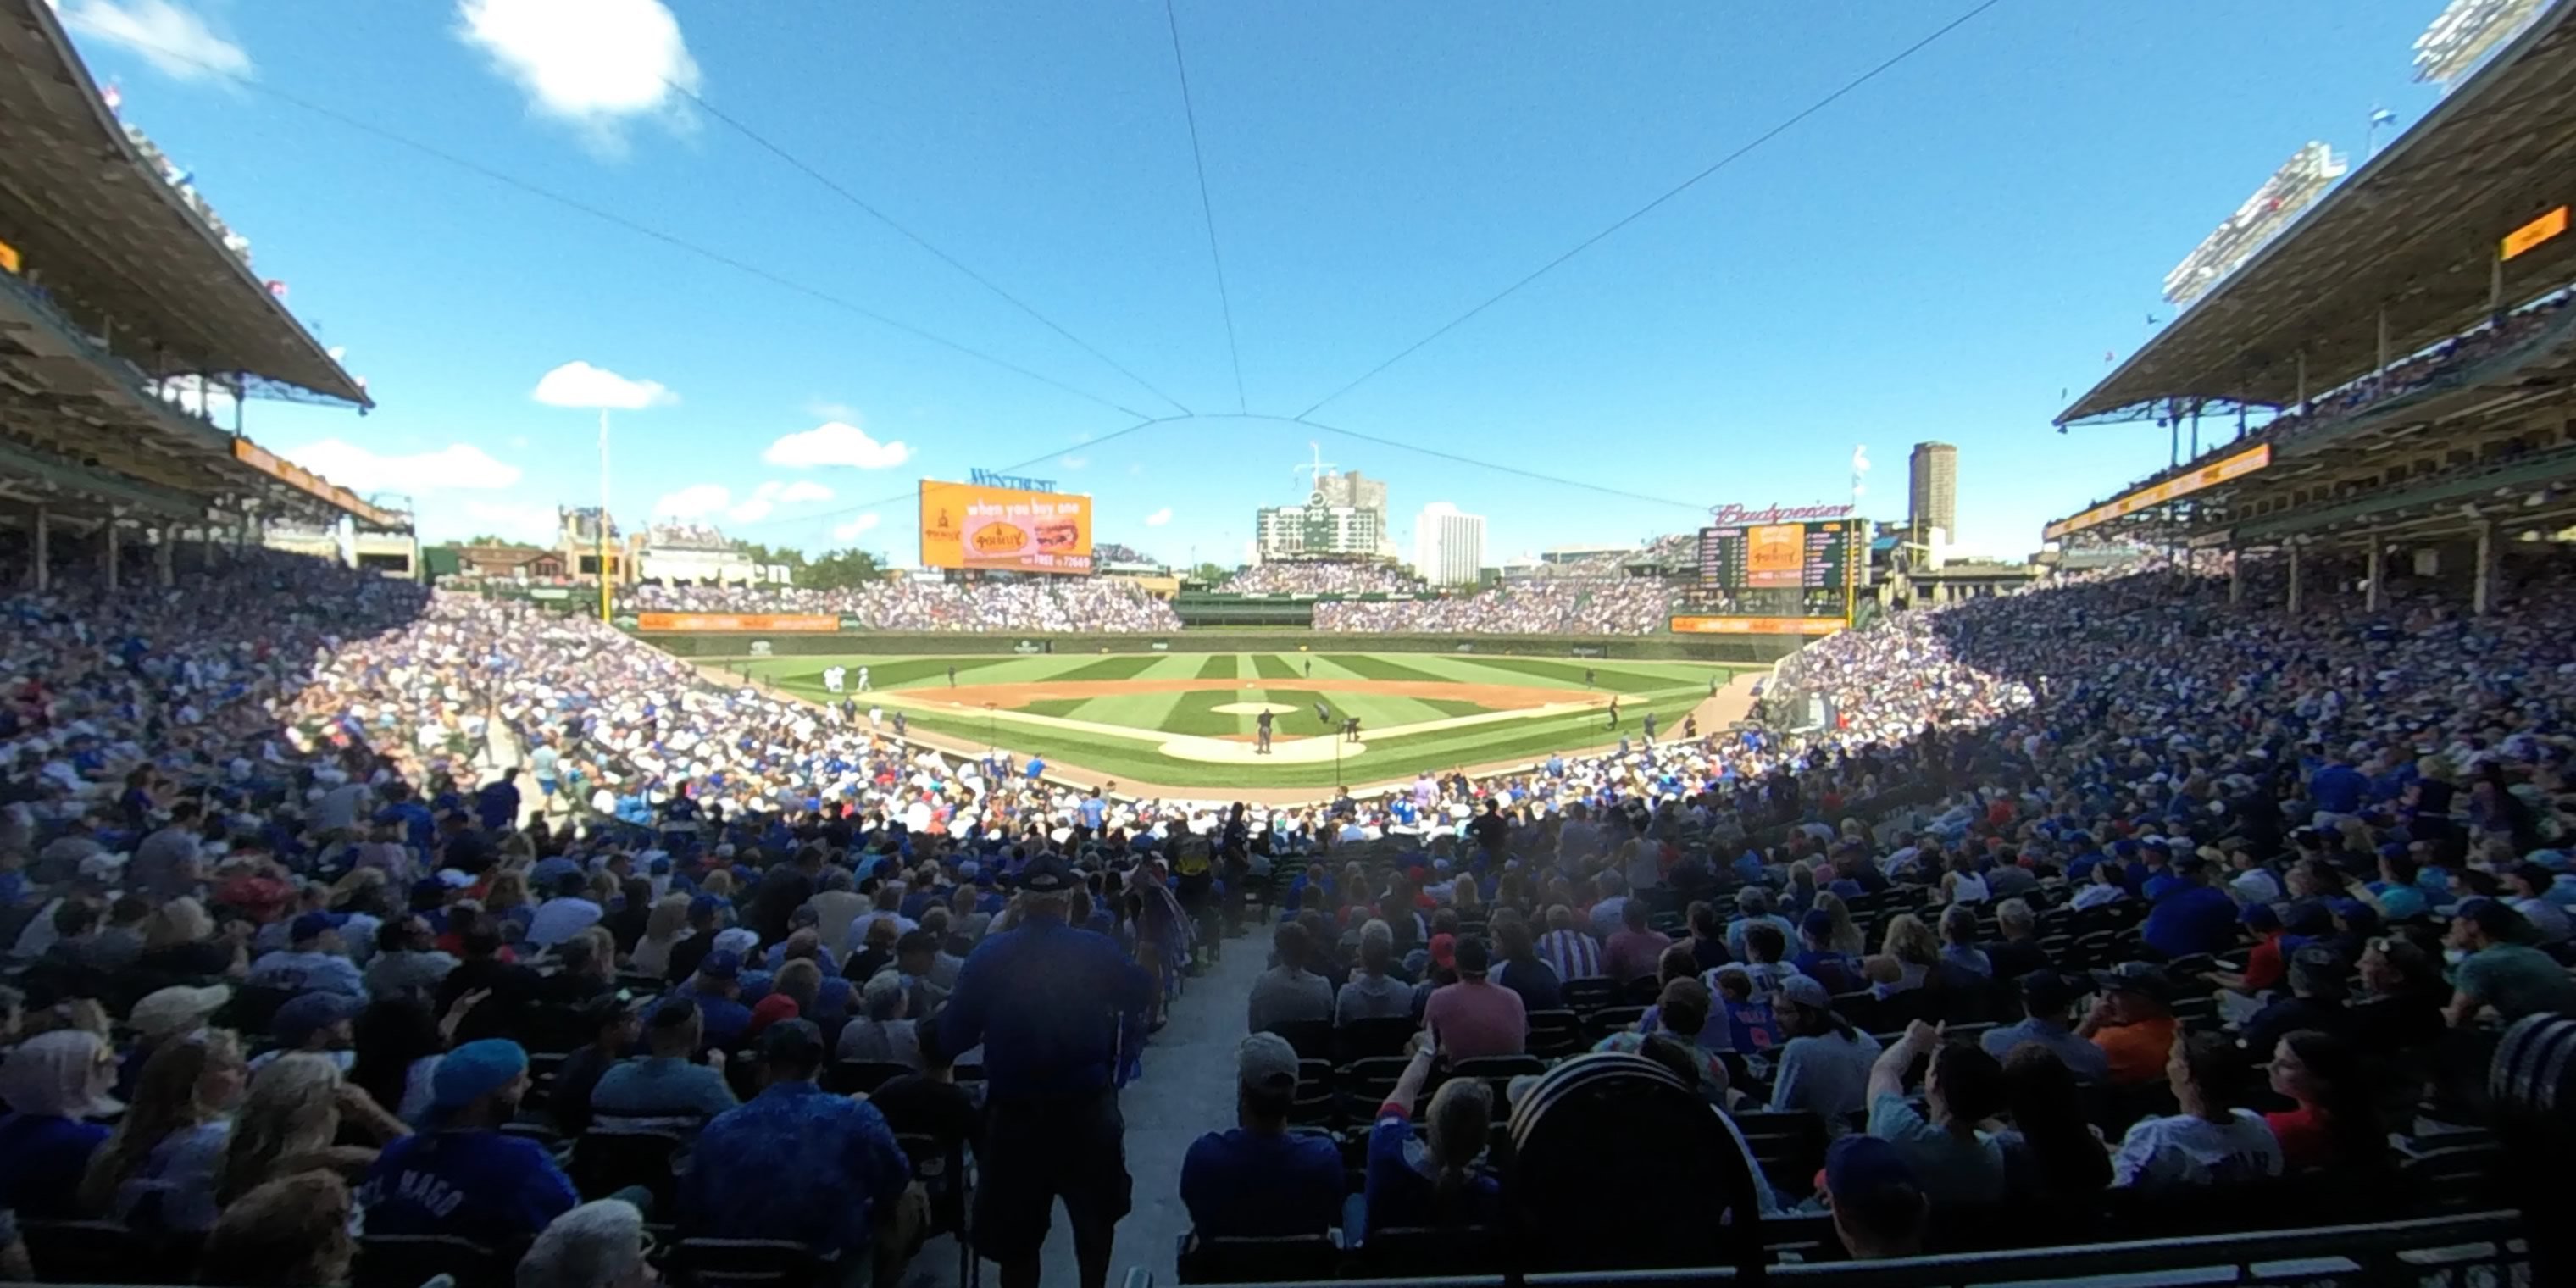 section 117 panoramic seat view  for baseball - wrigley field